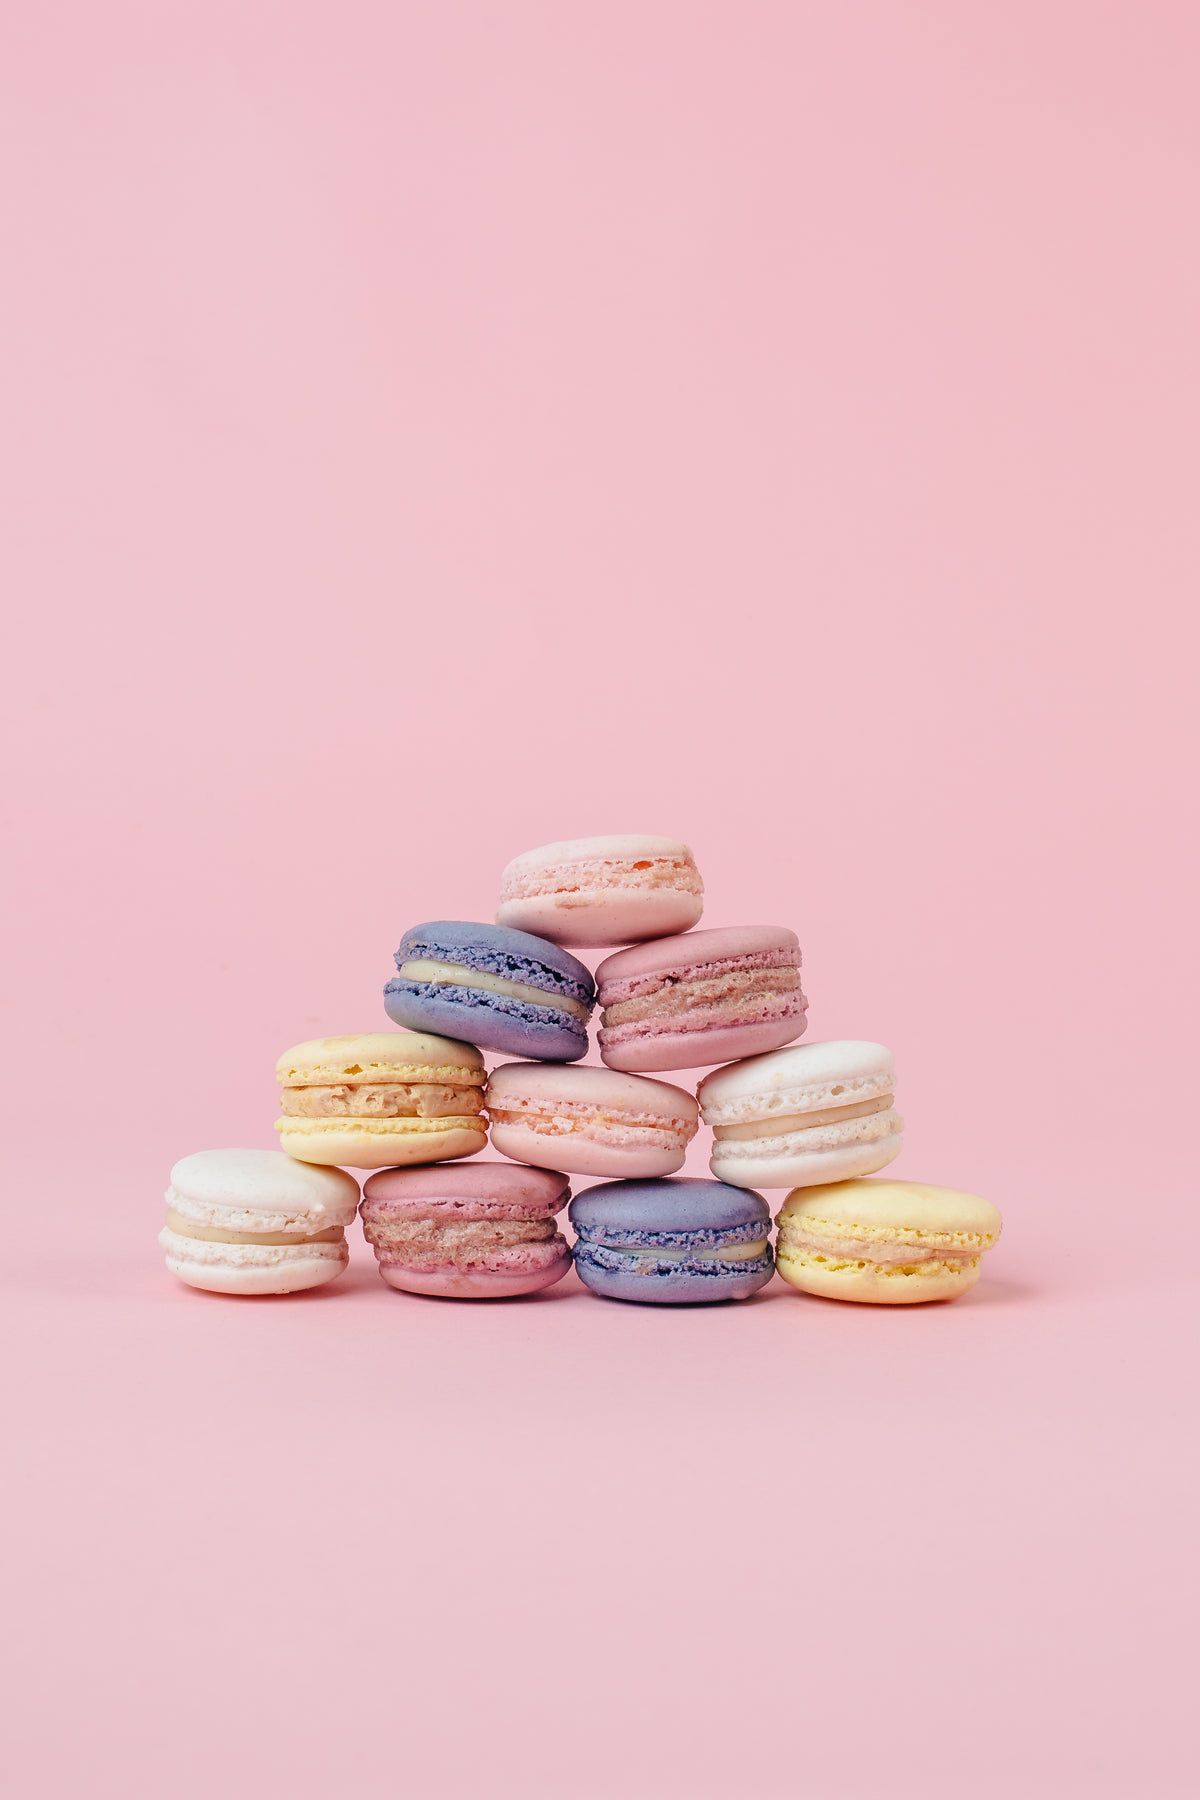 Browse Free HD Image of Pastel Macaron Pyramid On Pink Portrait